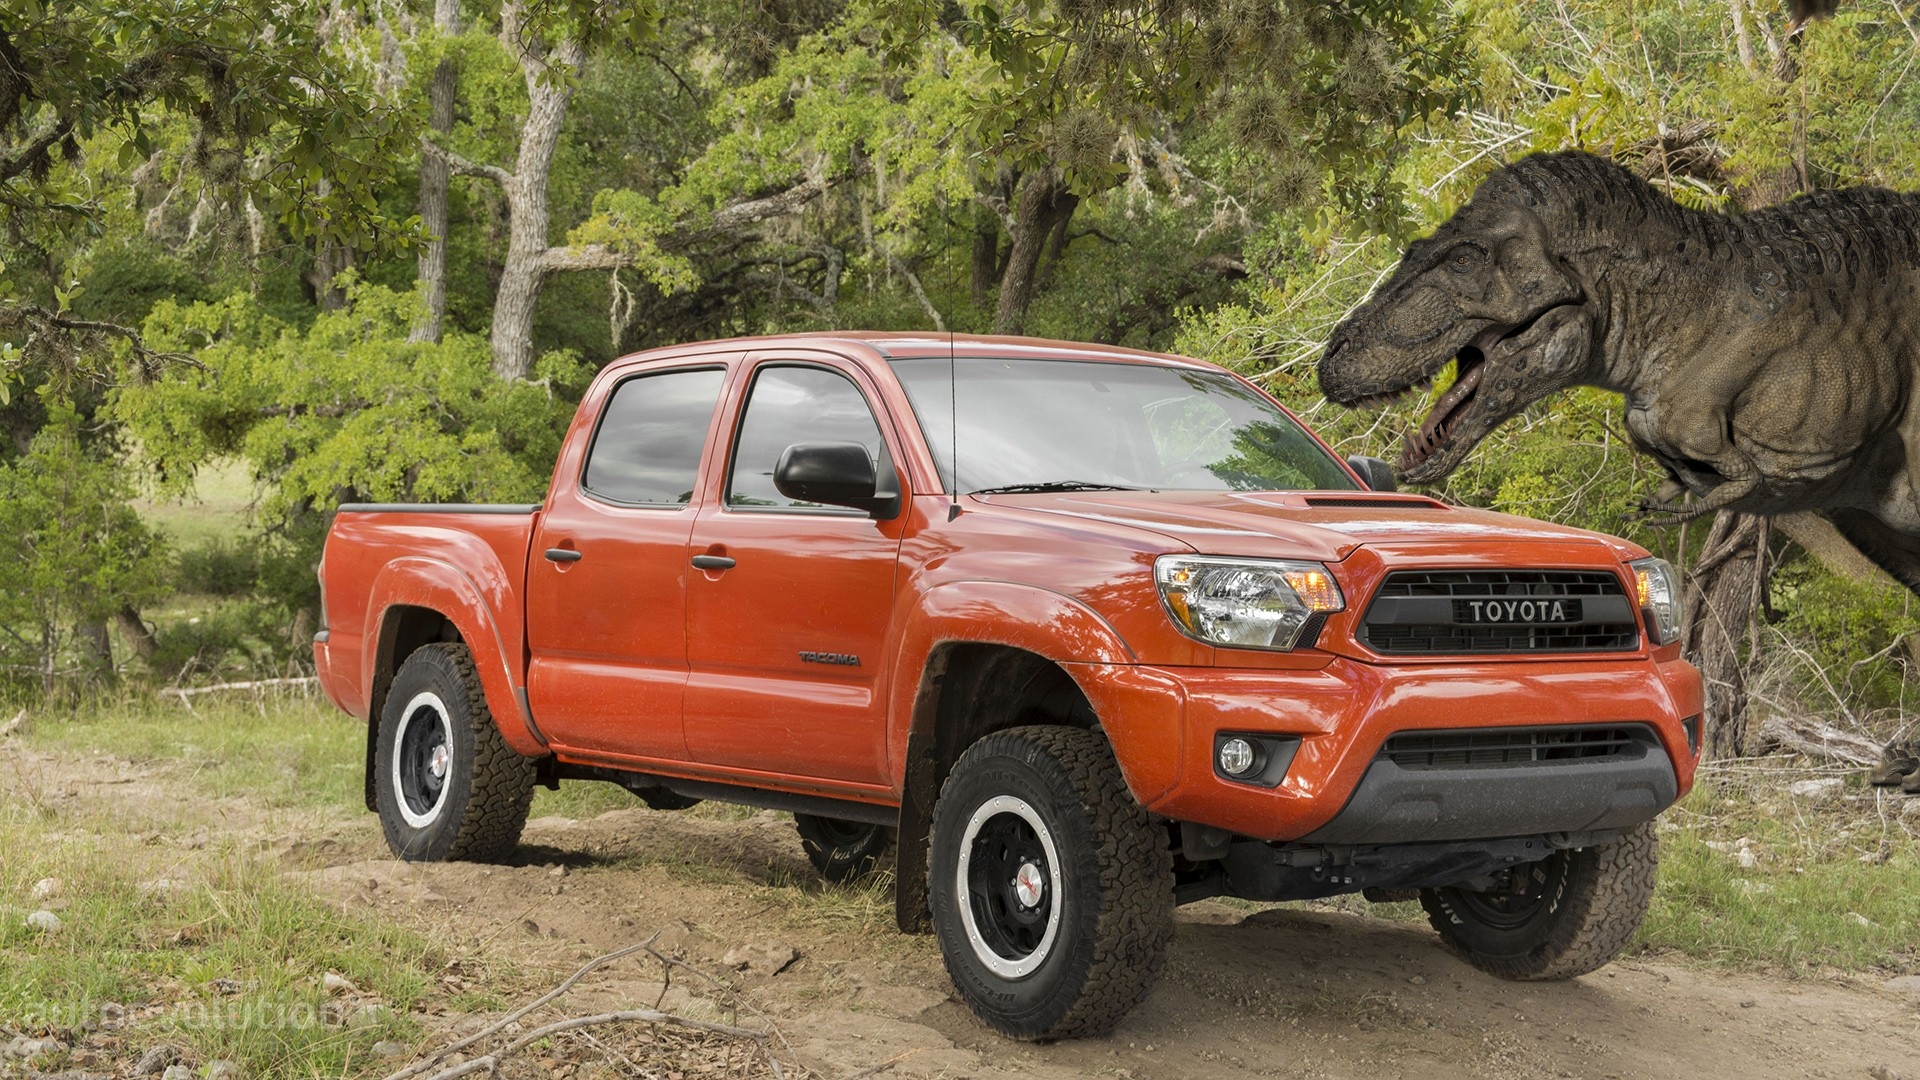  Toyota Tacoma TRD Pro HD Wallpapers Conquering